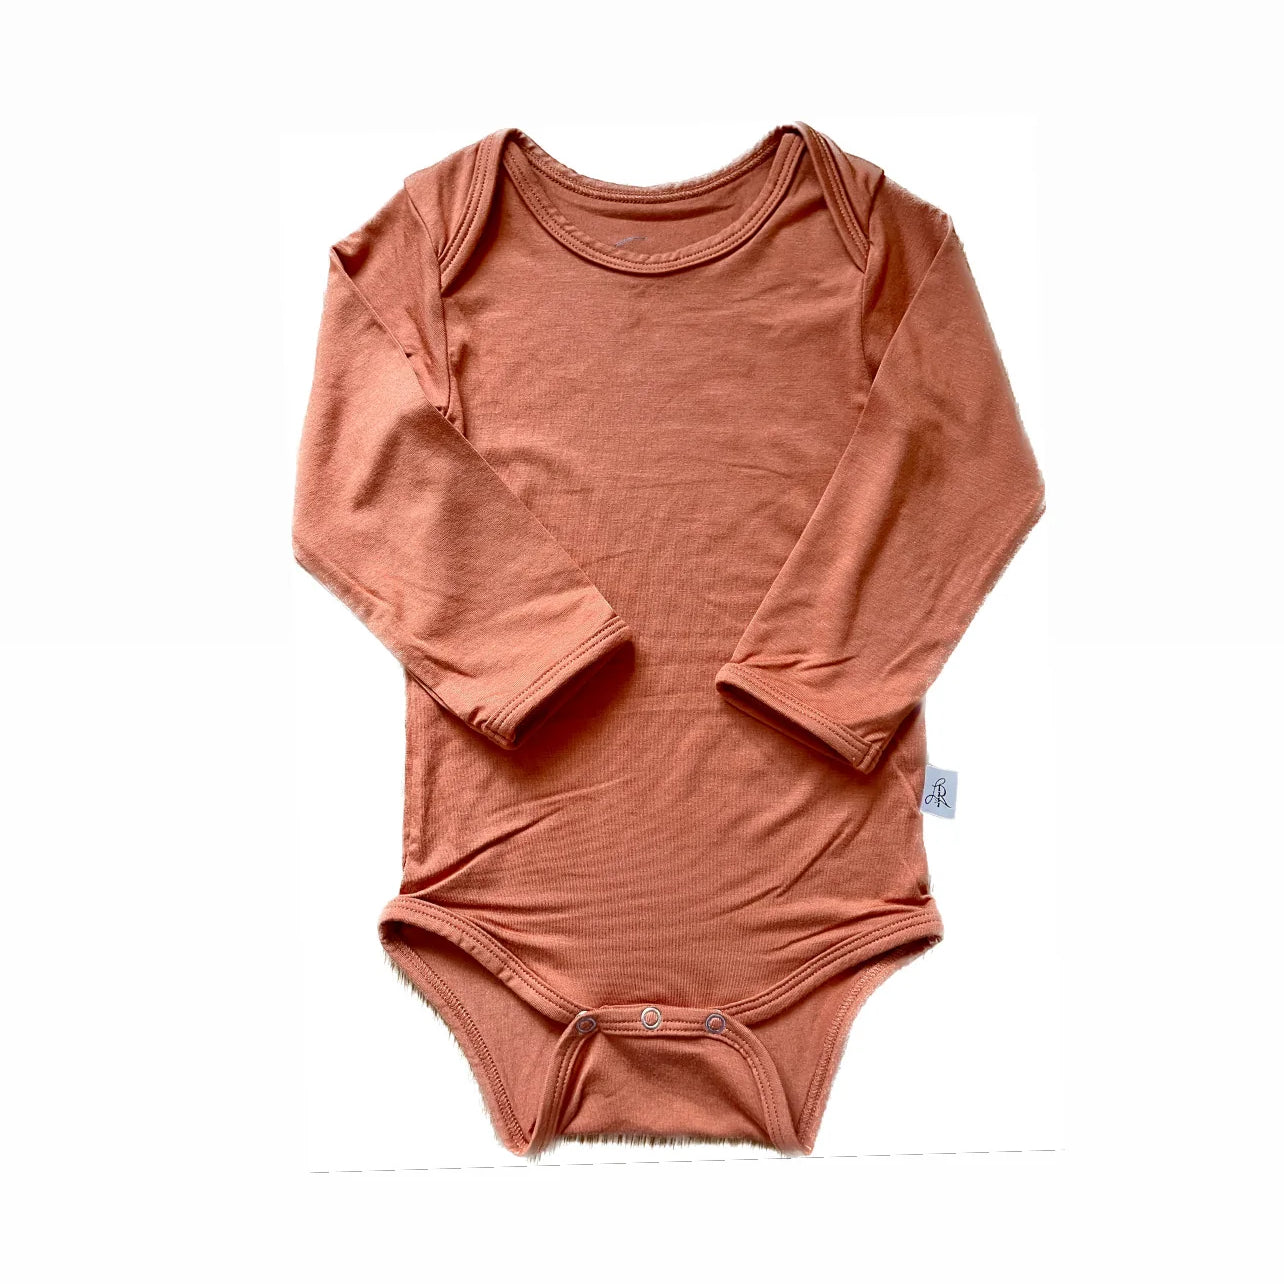 Little Roots Long-Sleeve Body Suits